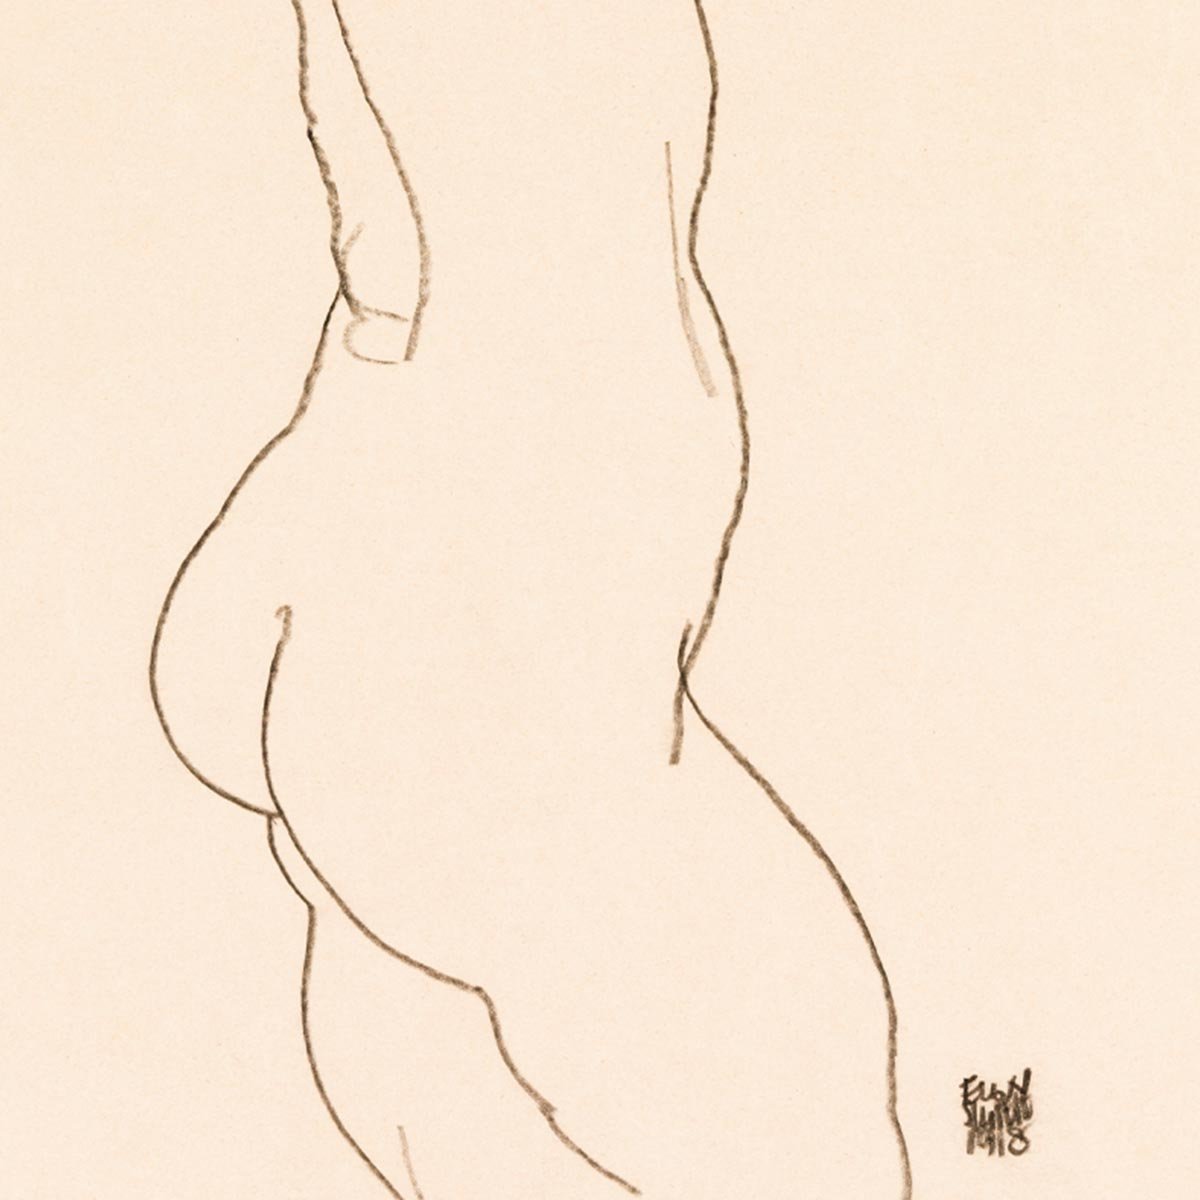 Standing Nude, Facing Right (1918), Egon Schiele